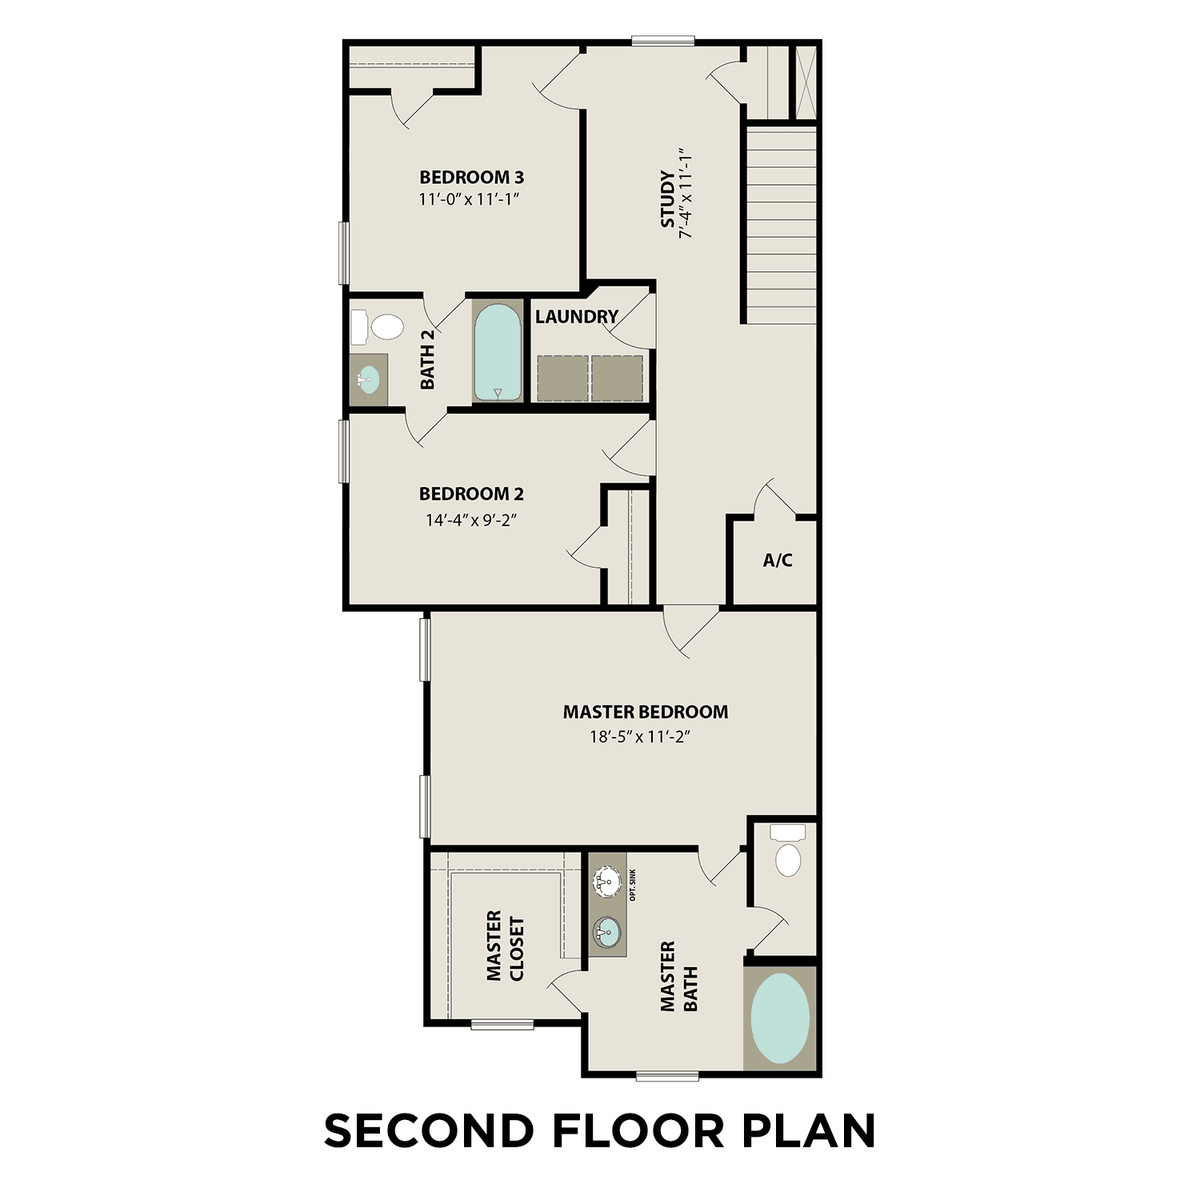 2 - The Lily A floor plan layout for 7023 Cedar Breeze Court in Davidson Homes' Enclave at Cypress community.